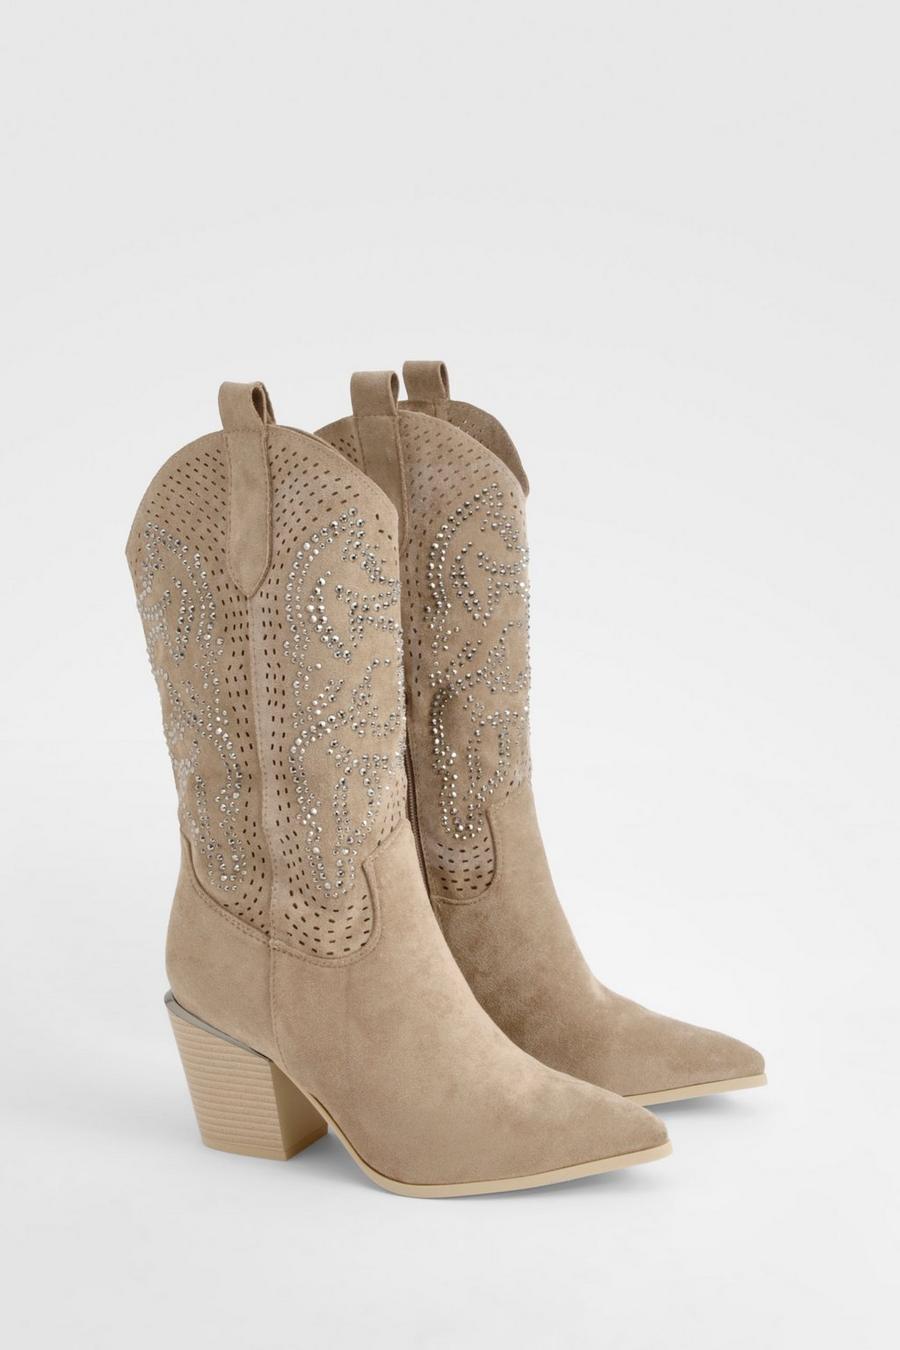 Taupe Embellished Calf High Western Boots 